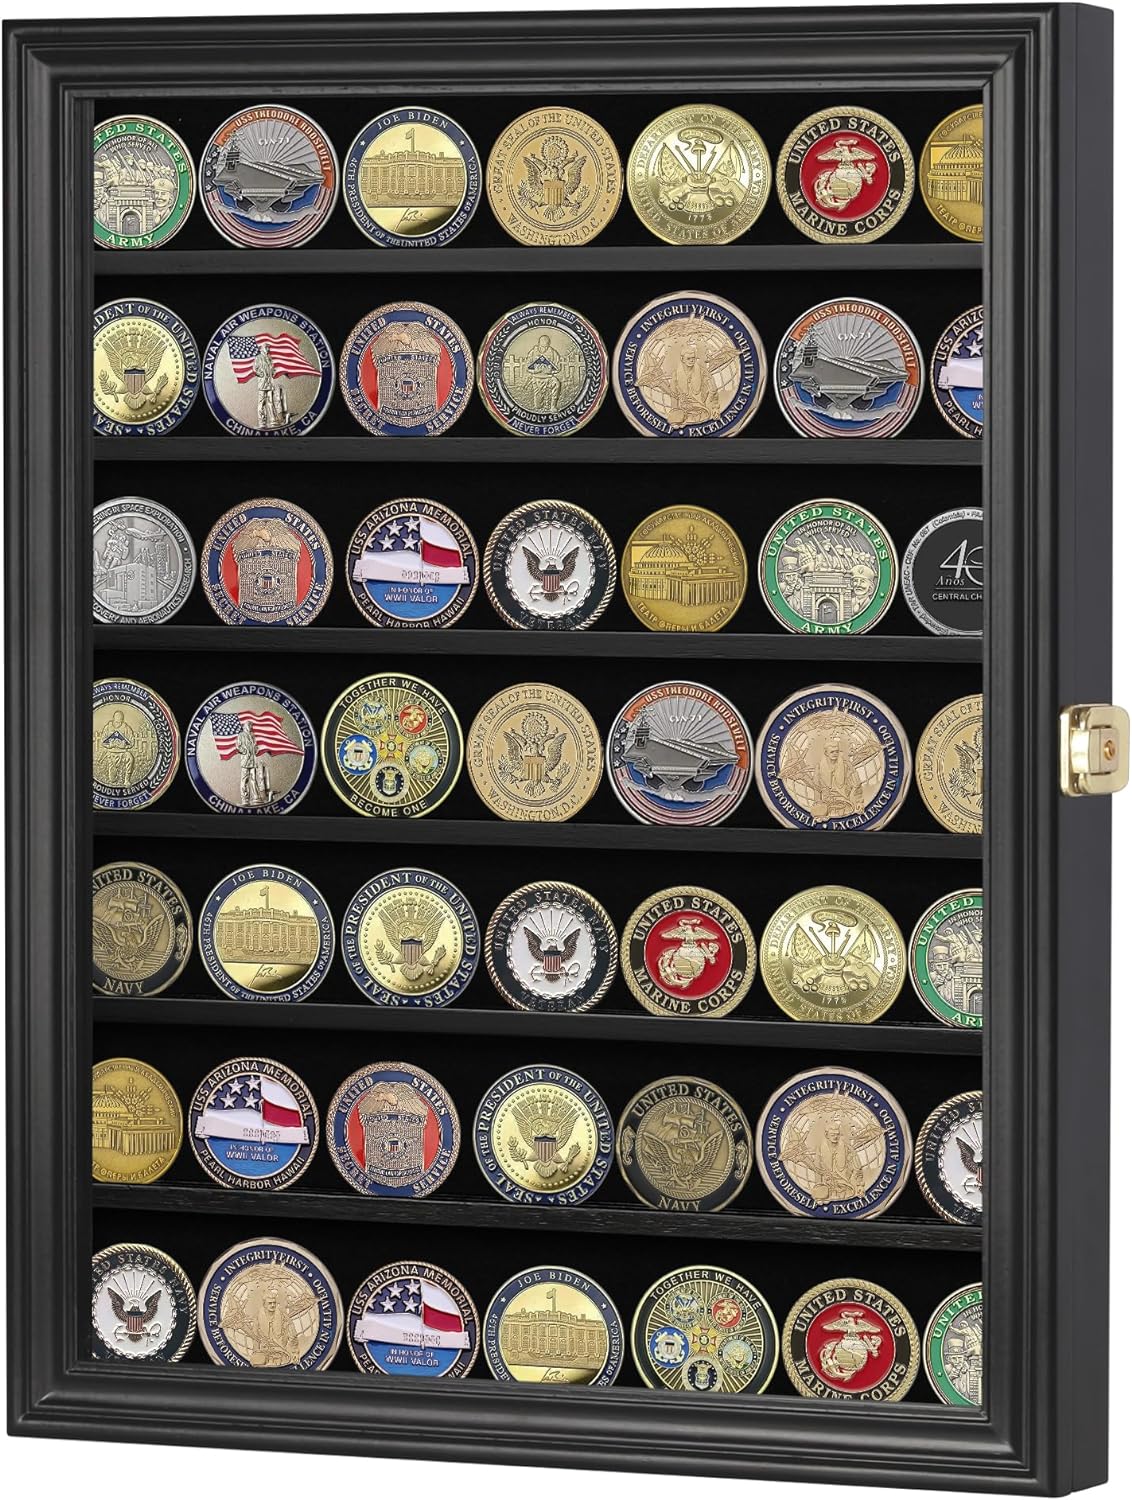 Lockable Military Challenge Coin Display Case Cabinet Rack Holder (Mahogany Finish) - The Military Gift Store